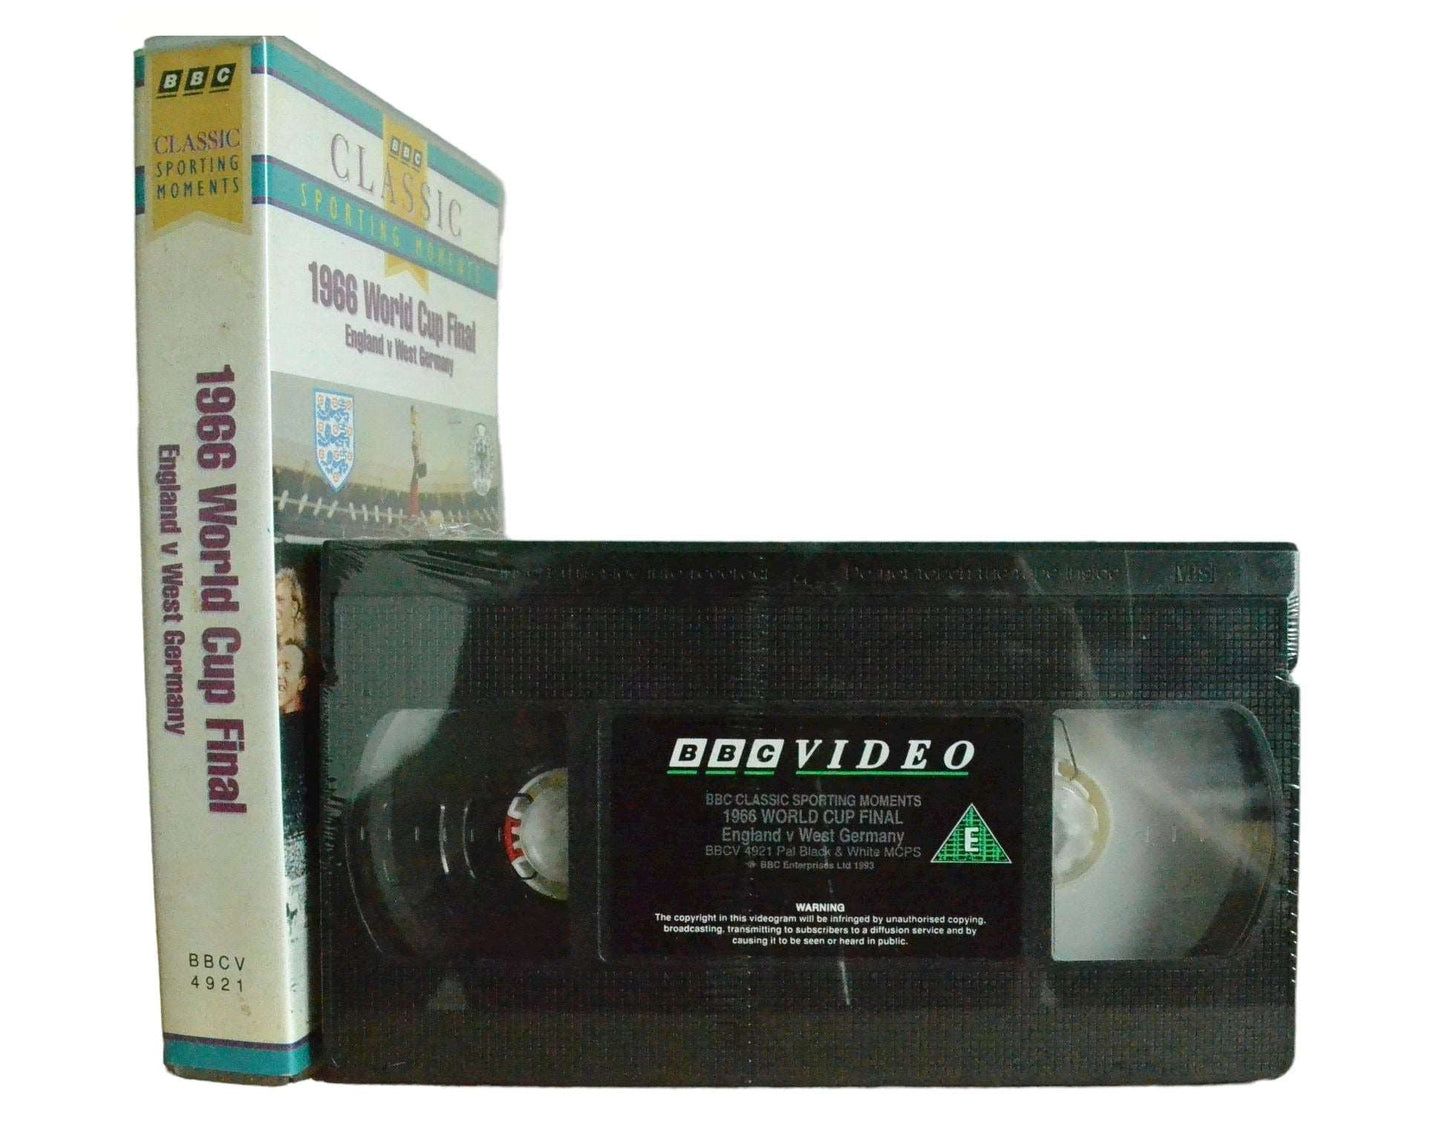 1966 Final World Cup (England v West Germany) - BBC Video - Brand New Sealed - Pal VHS-